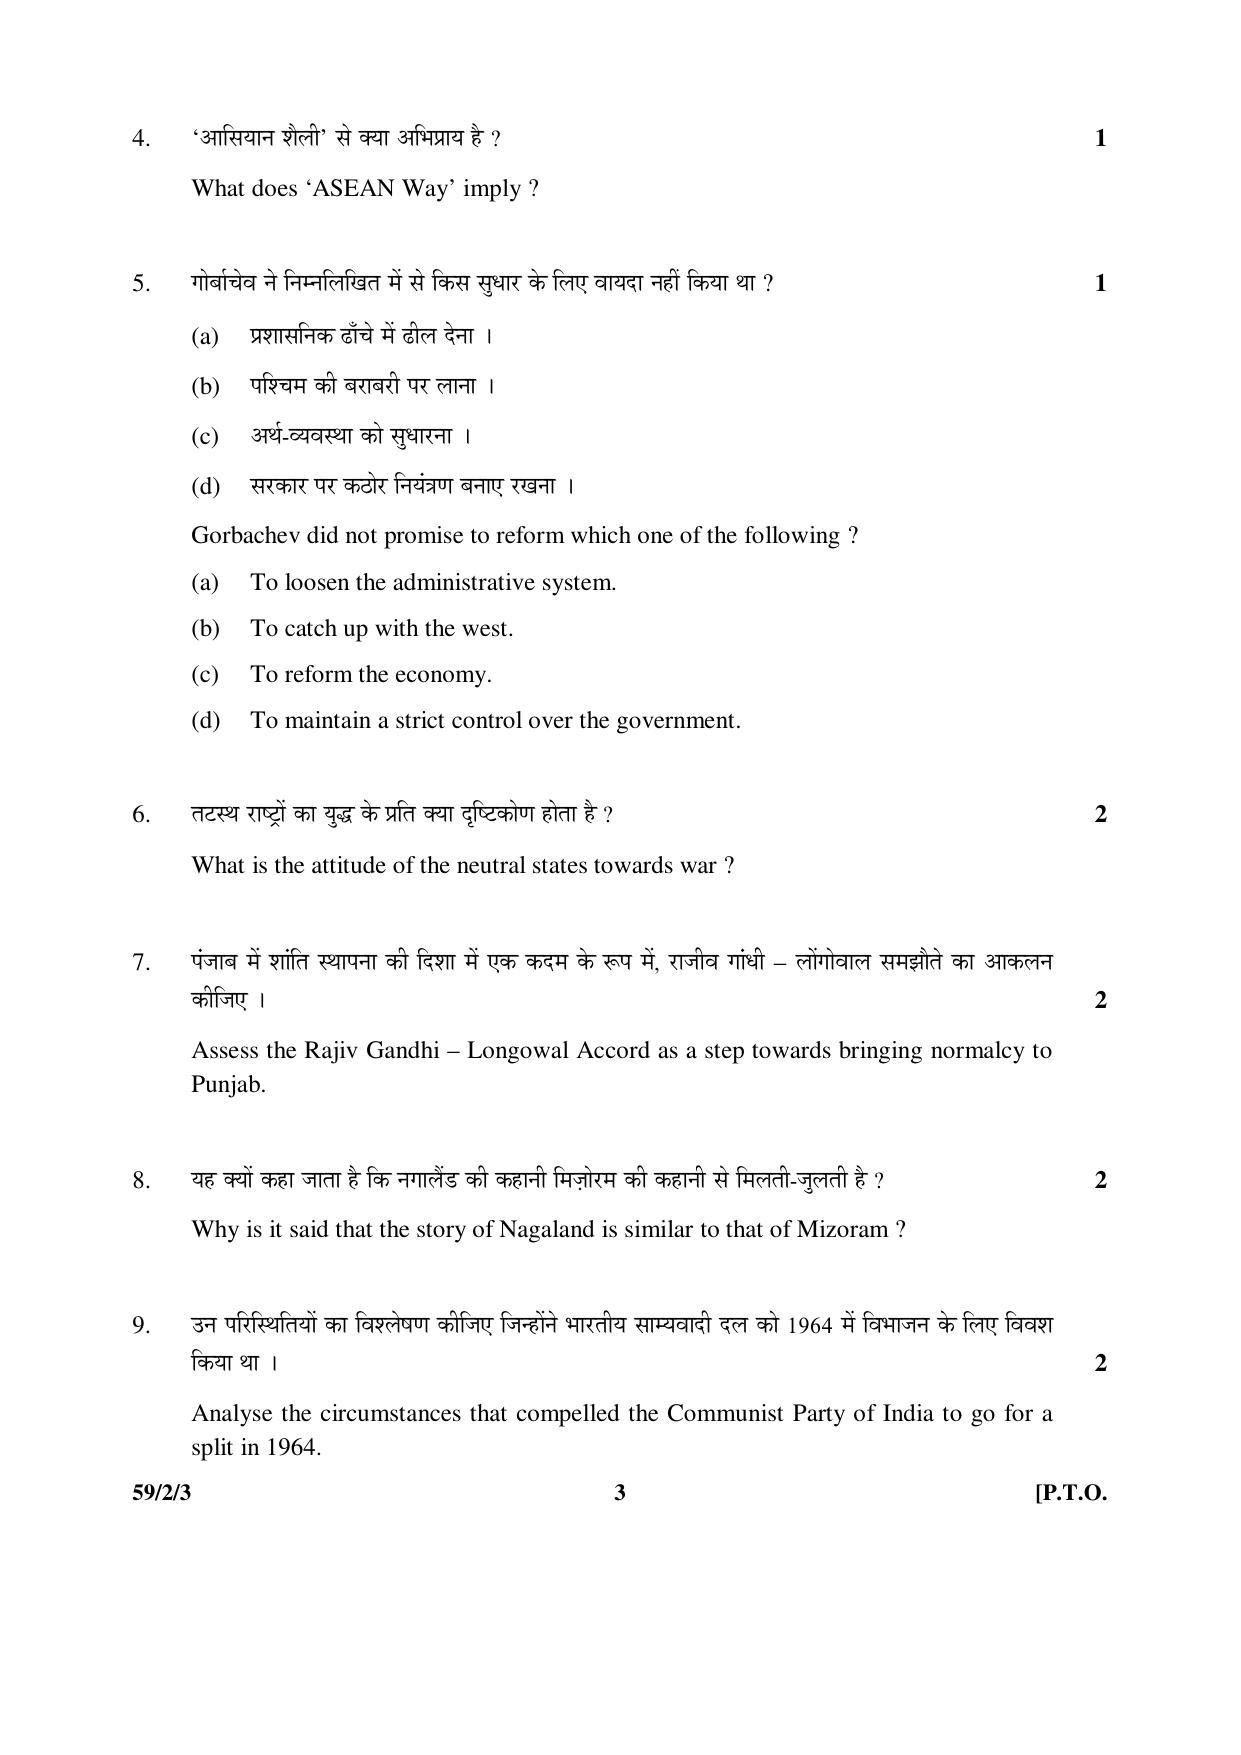 CBSE Class 12 59-2-3 _Political Science 2016 Question Paper - Page 3